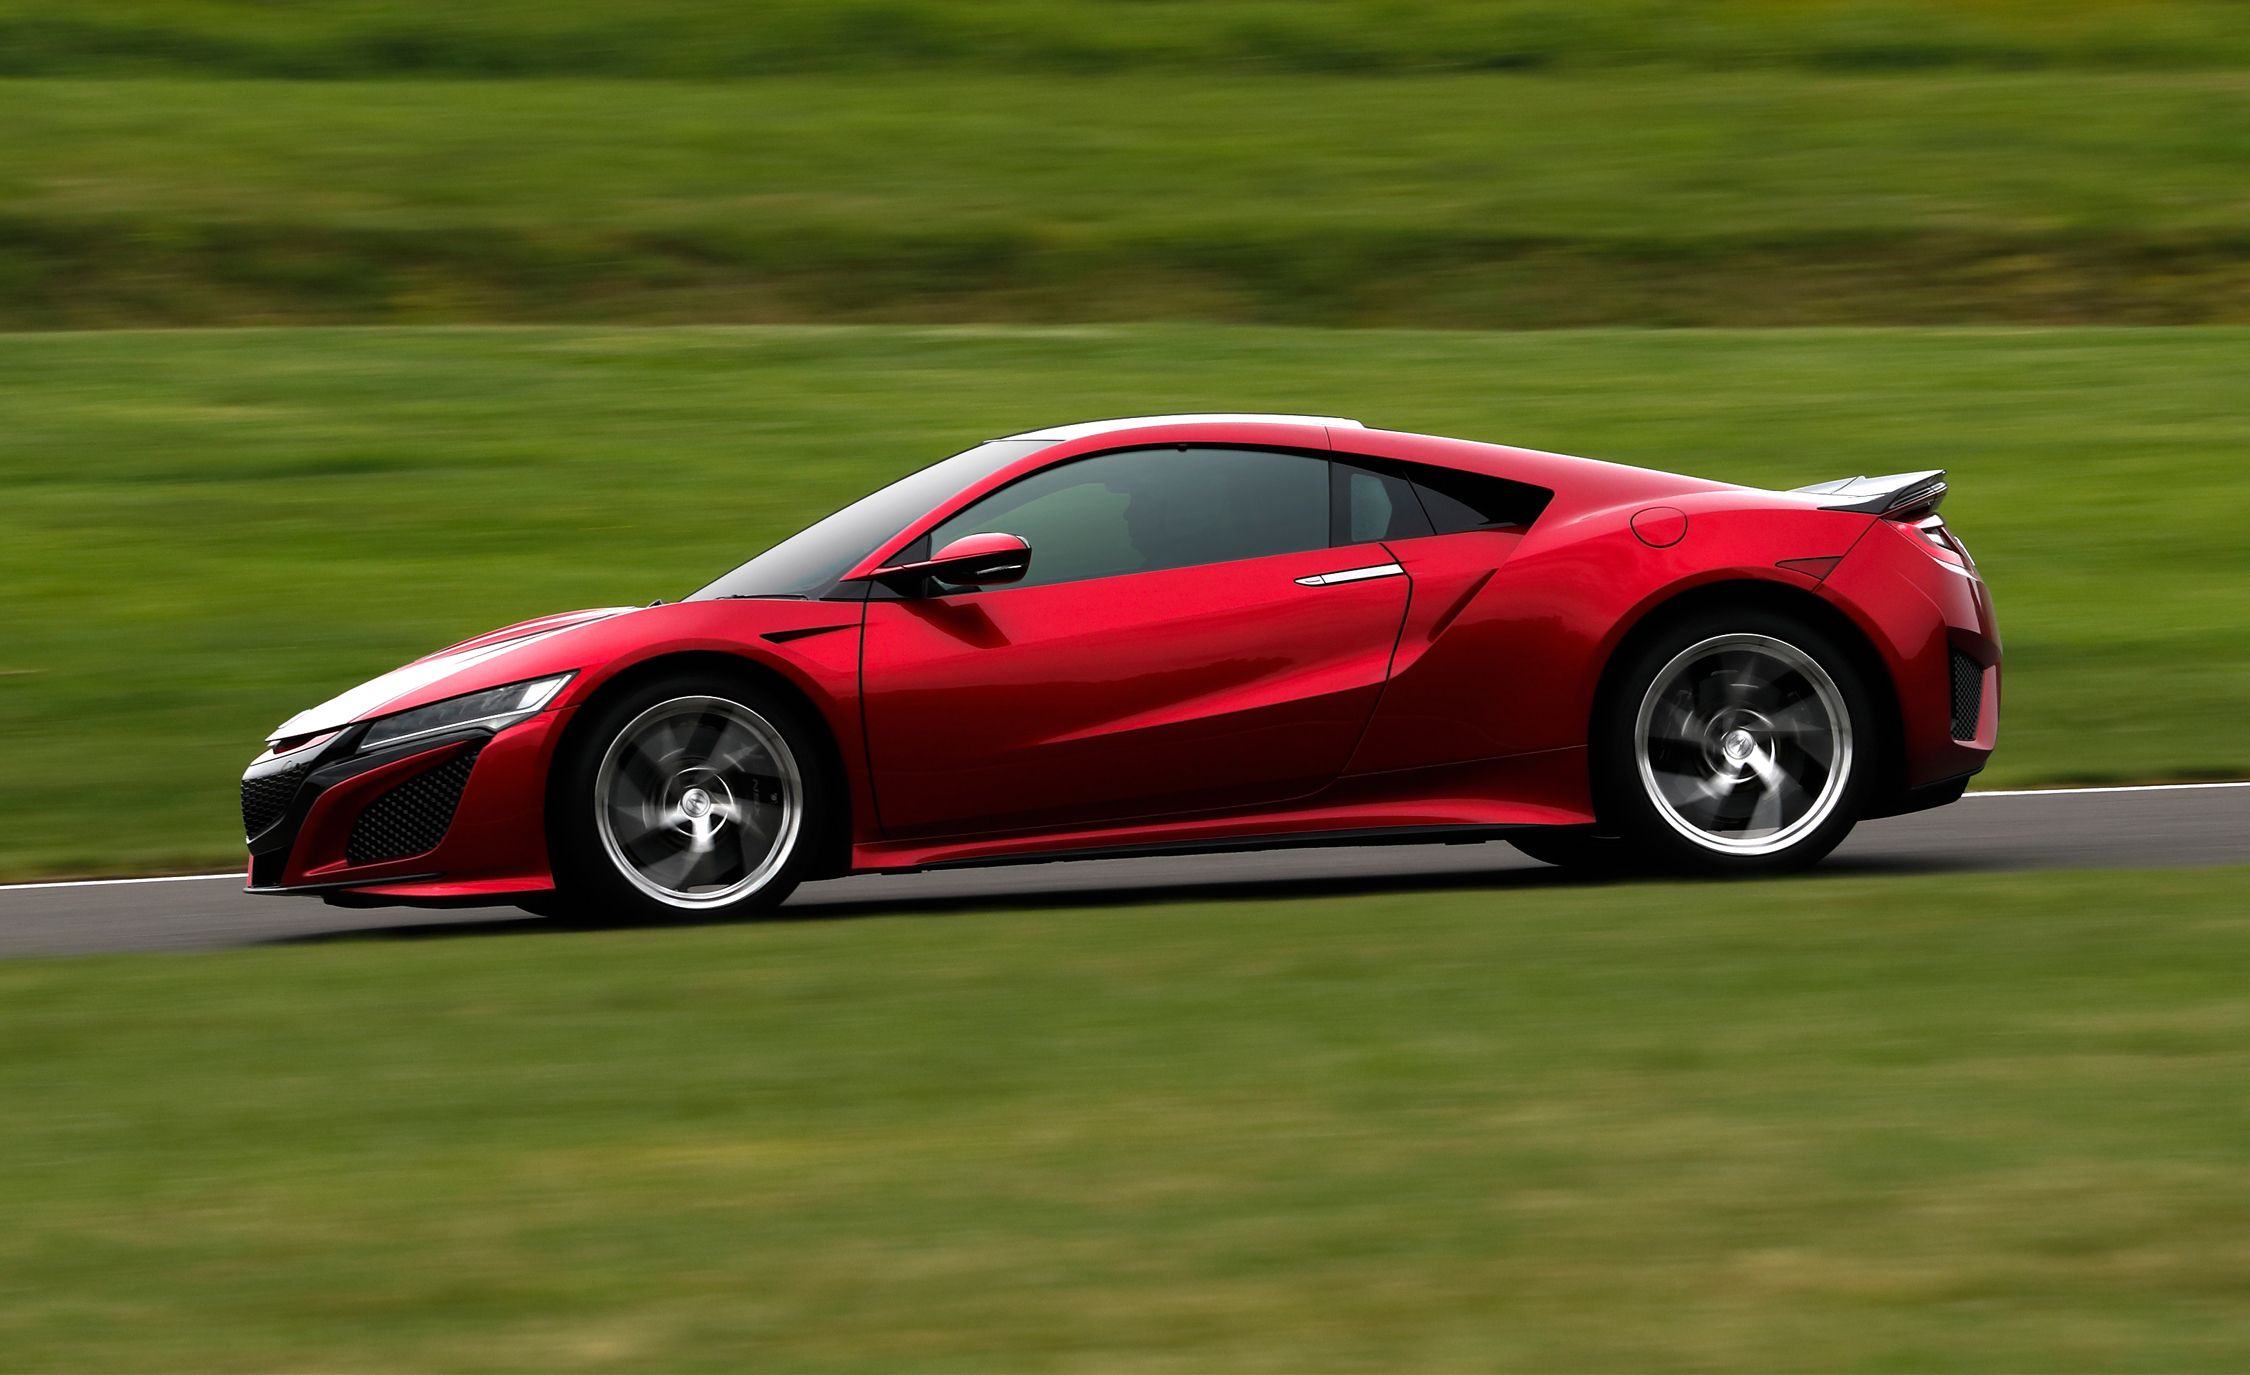 2019 Acura NSX – A Hybrid Supercar with Manners